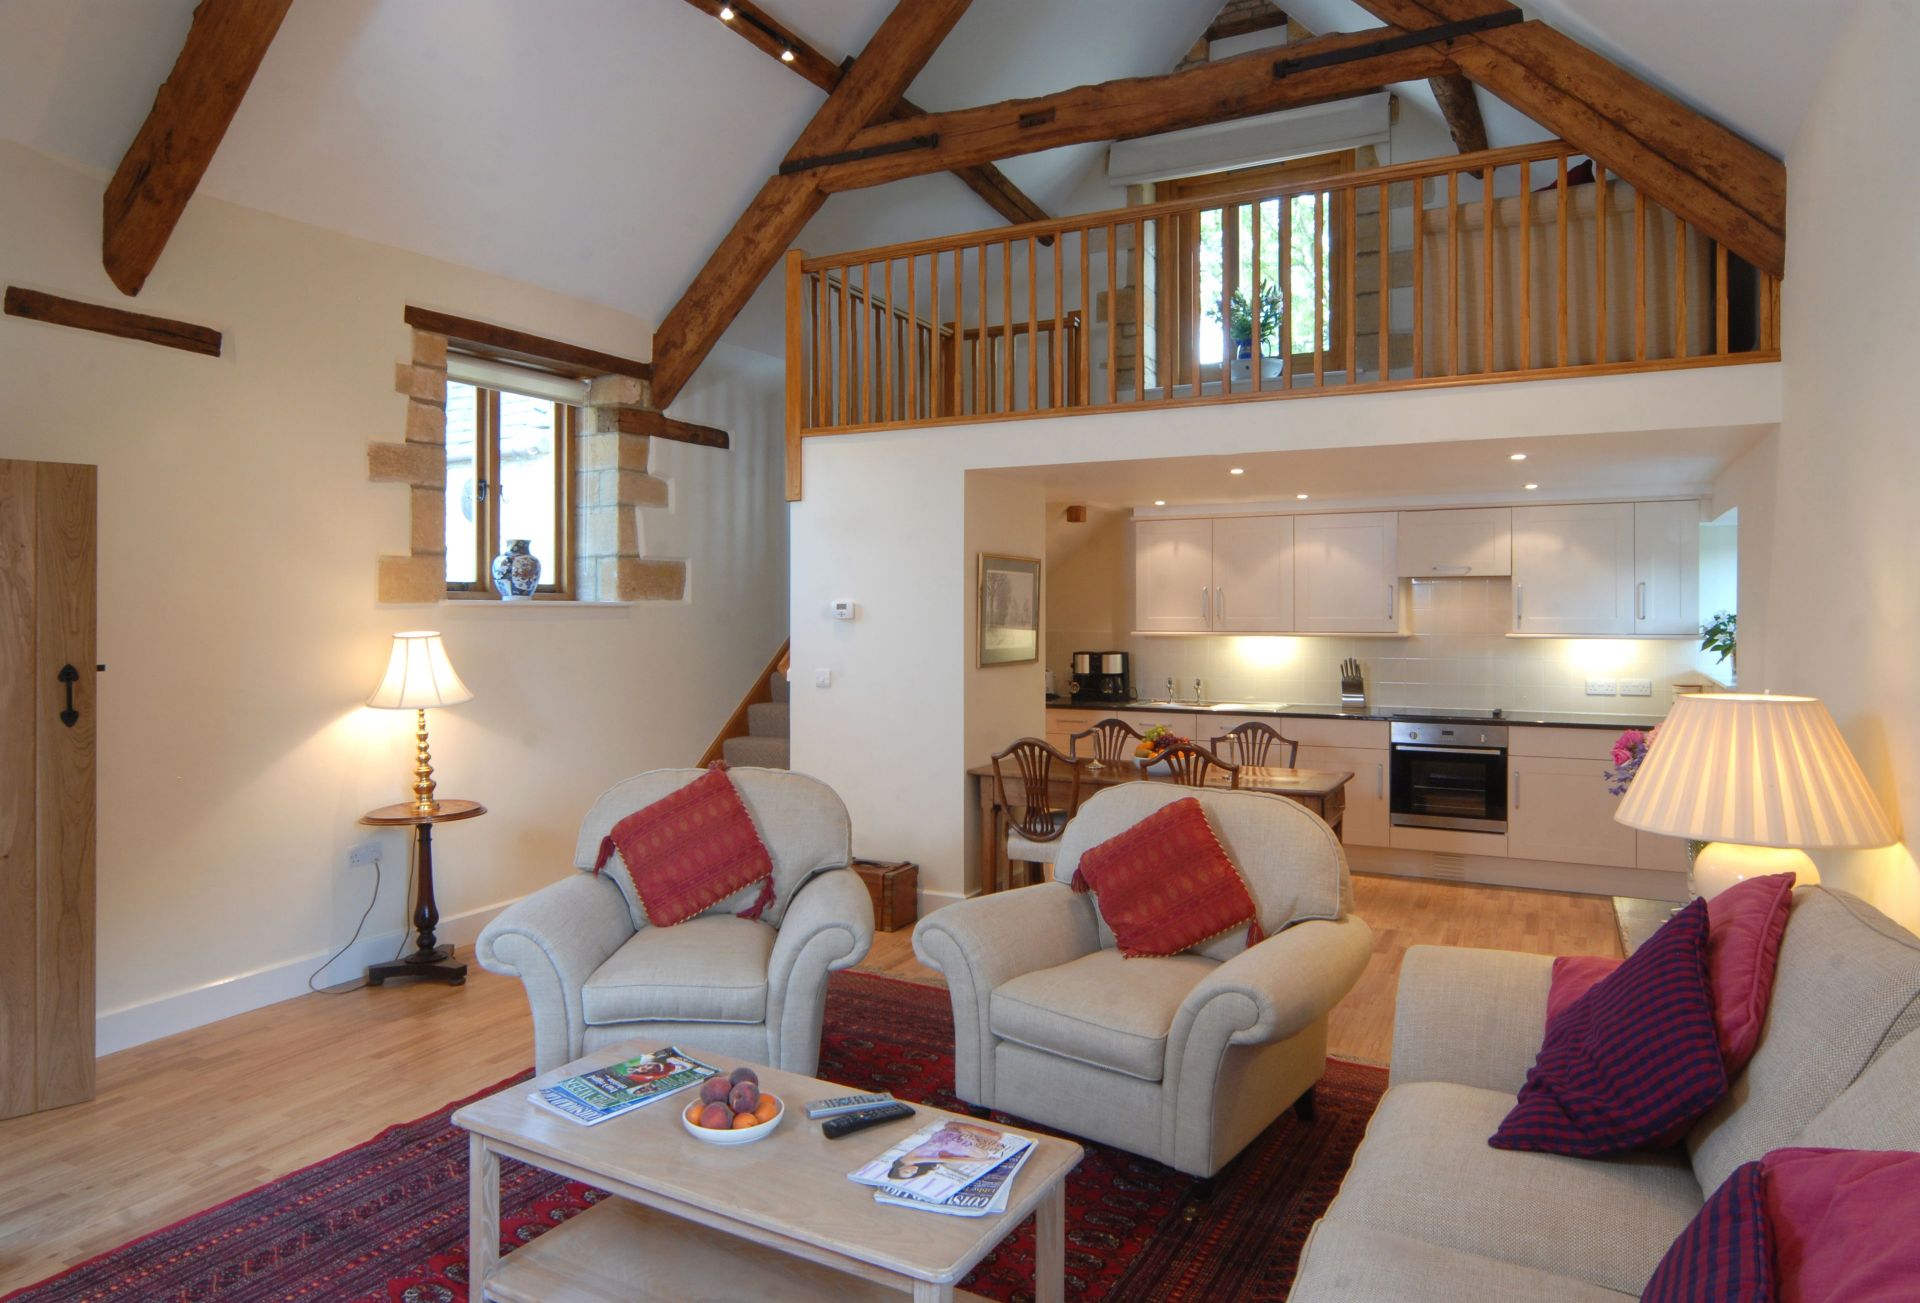 Details about a cottage Holiday at Nellie's Barn